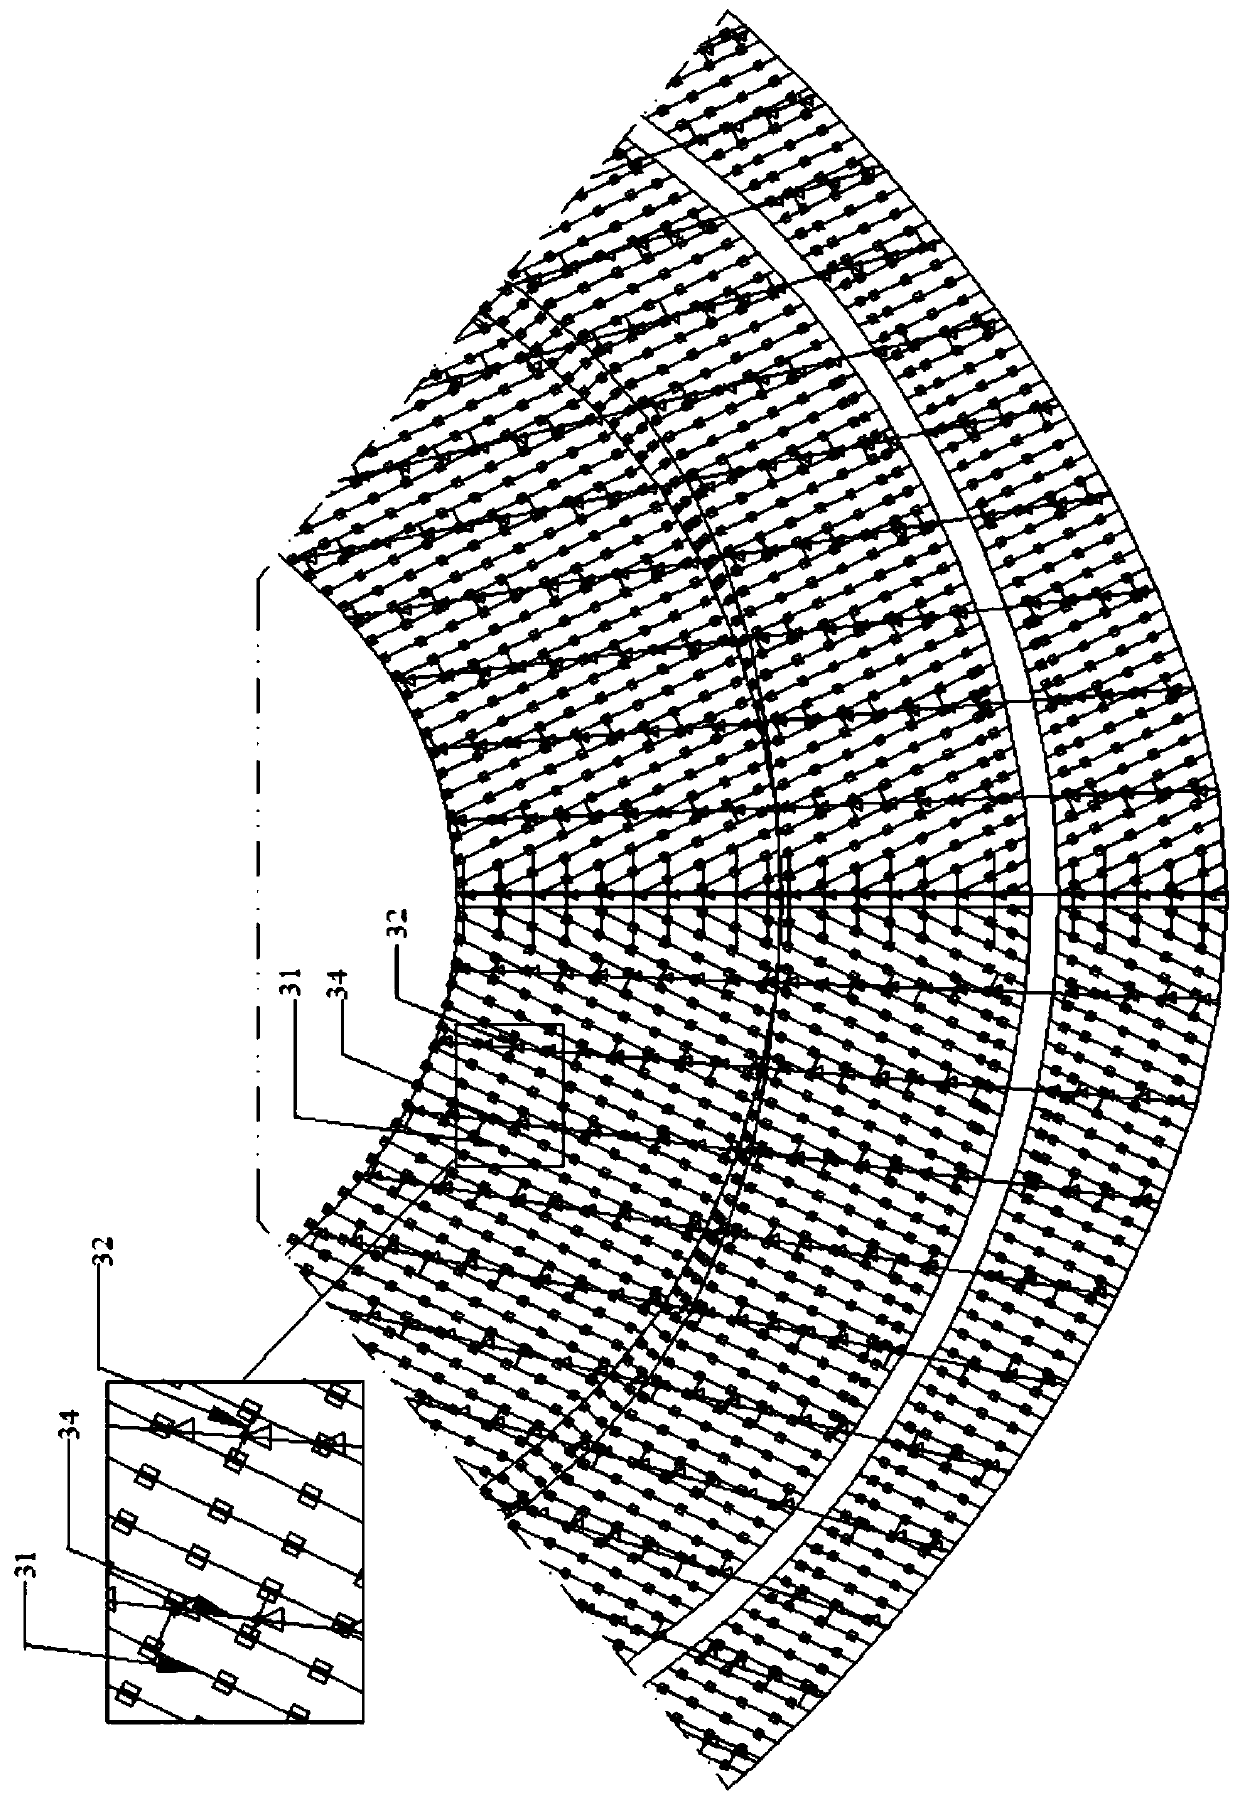 A hyperboloid special-shaped curtain wall system